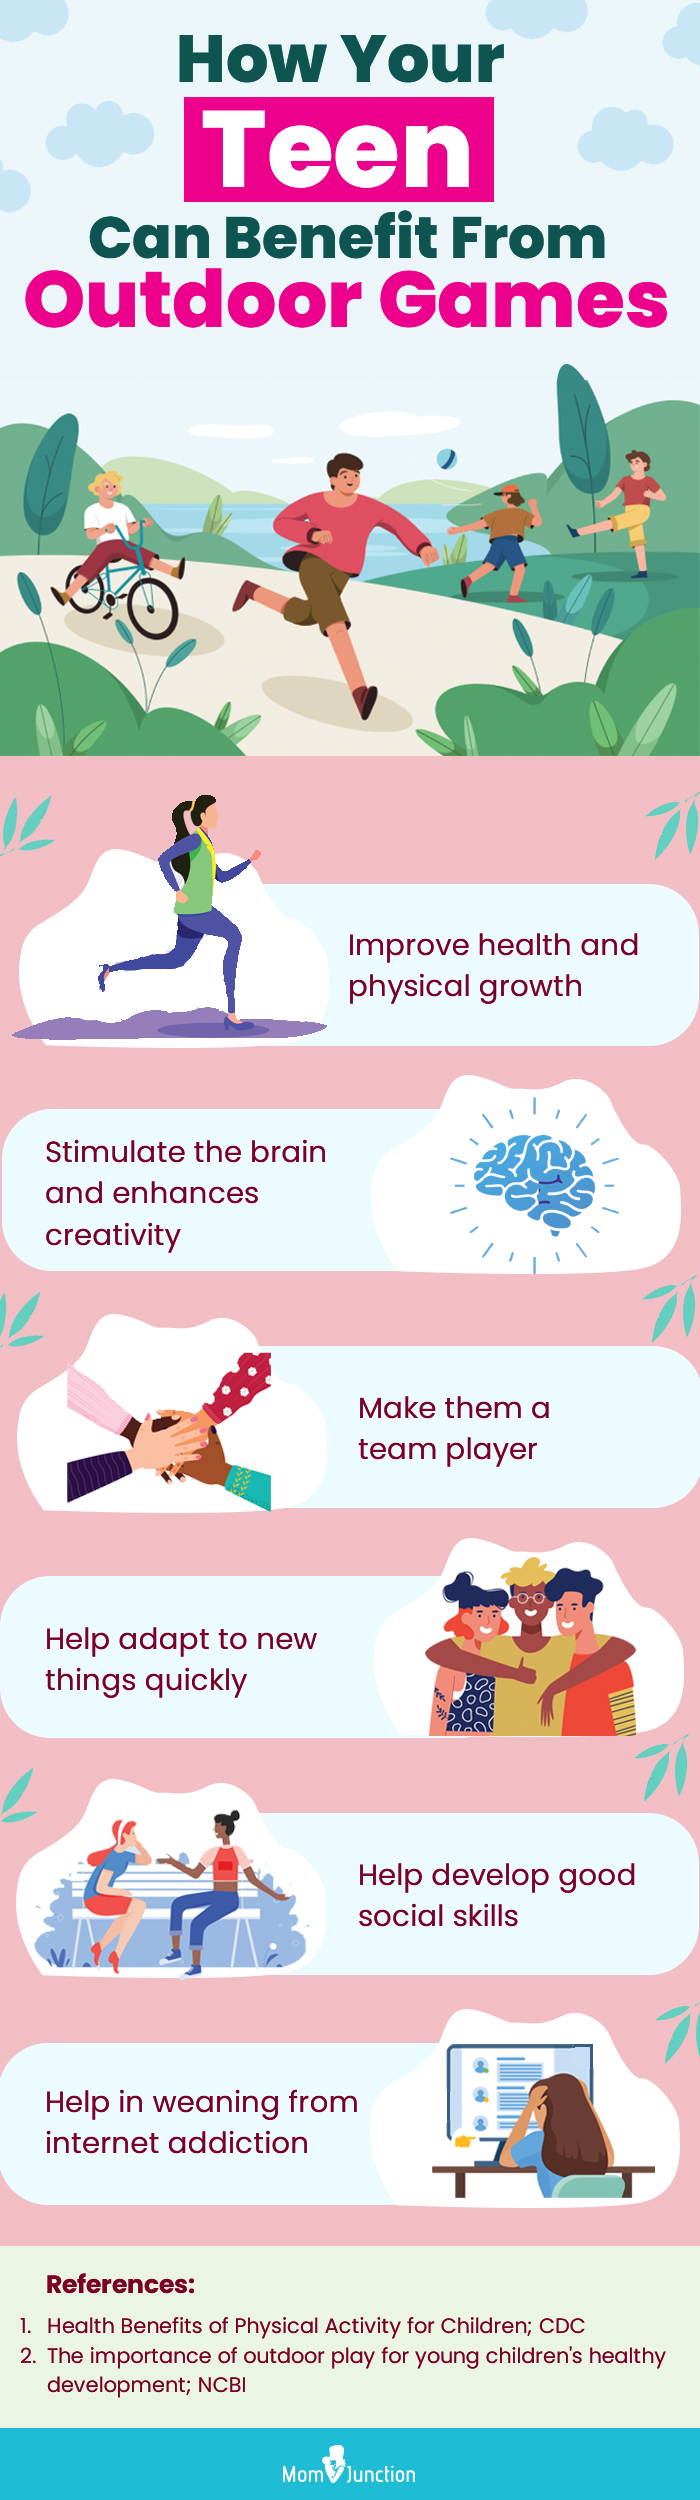 how your teen can benefit from outdoor games (infographic)